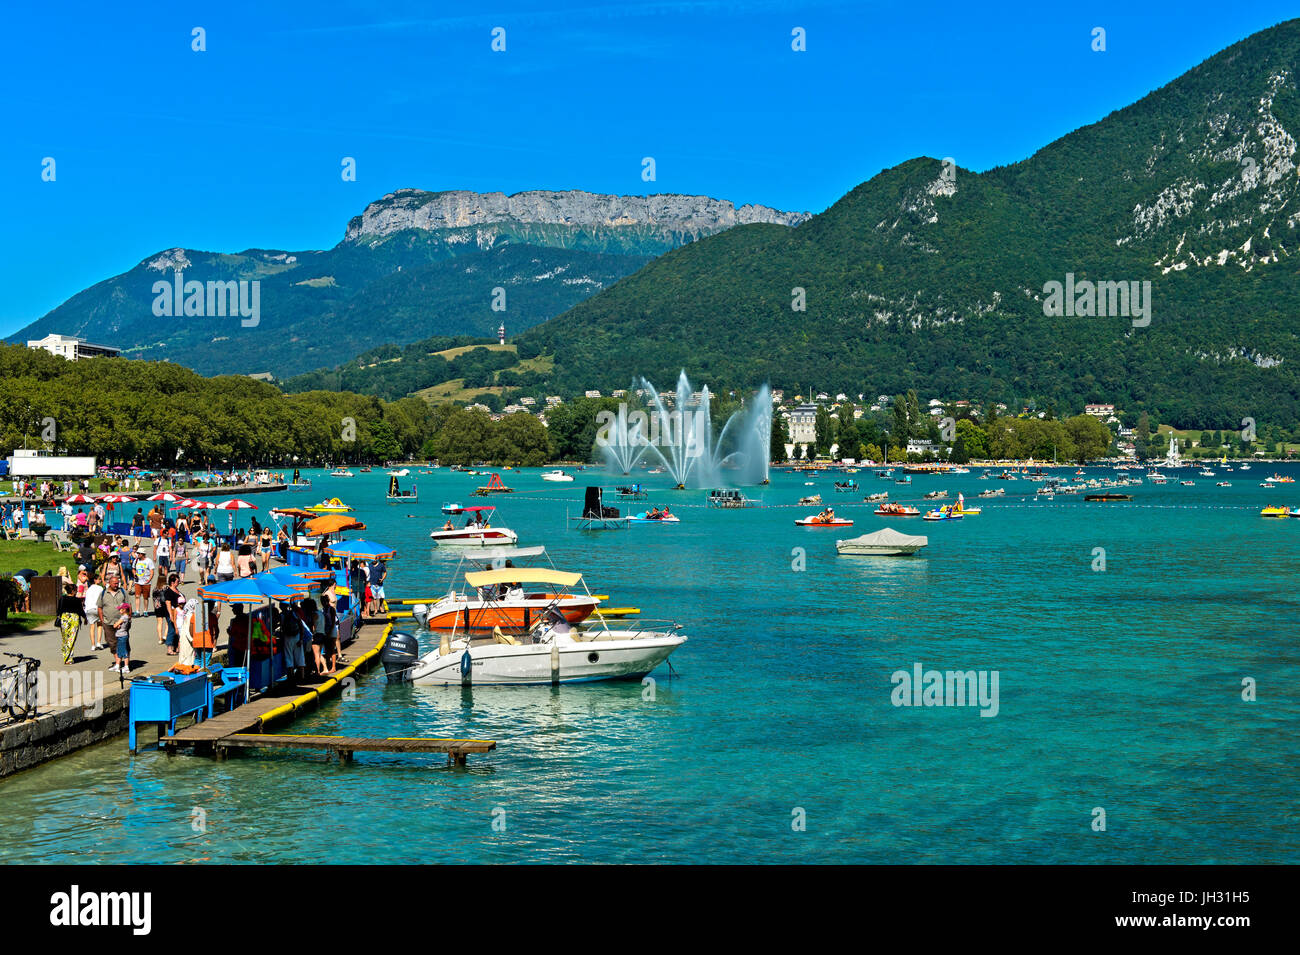 Lake Annecy, lac d'Annecy, Annecy, Haute-Savoie, France Stock Photo